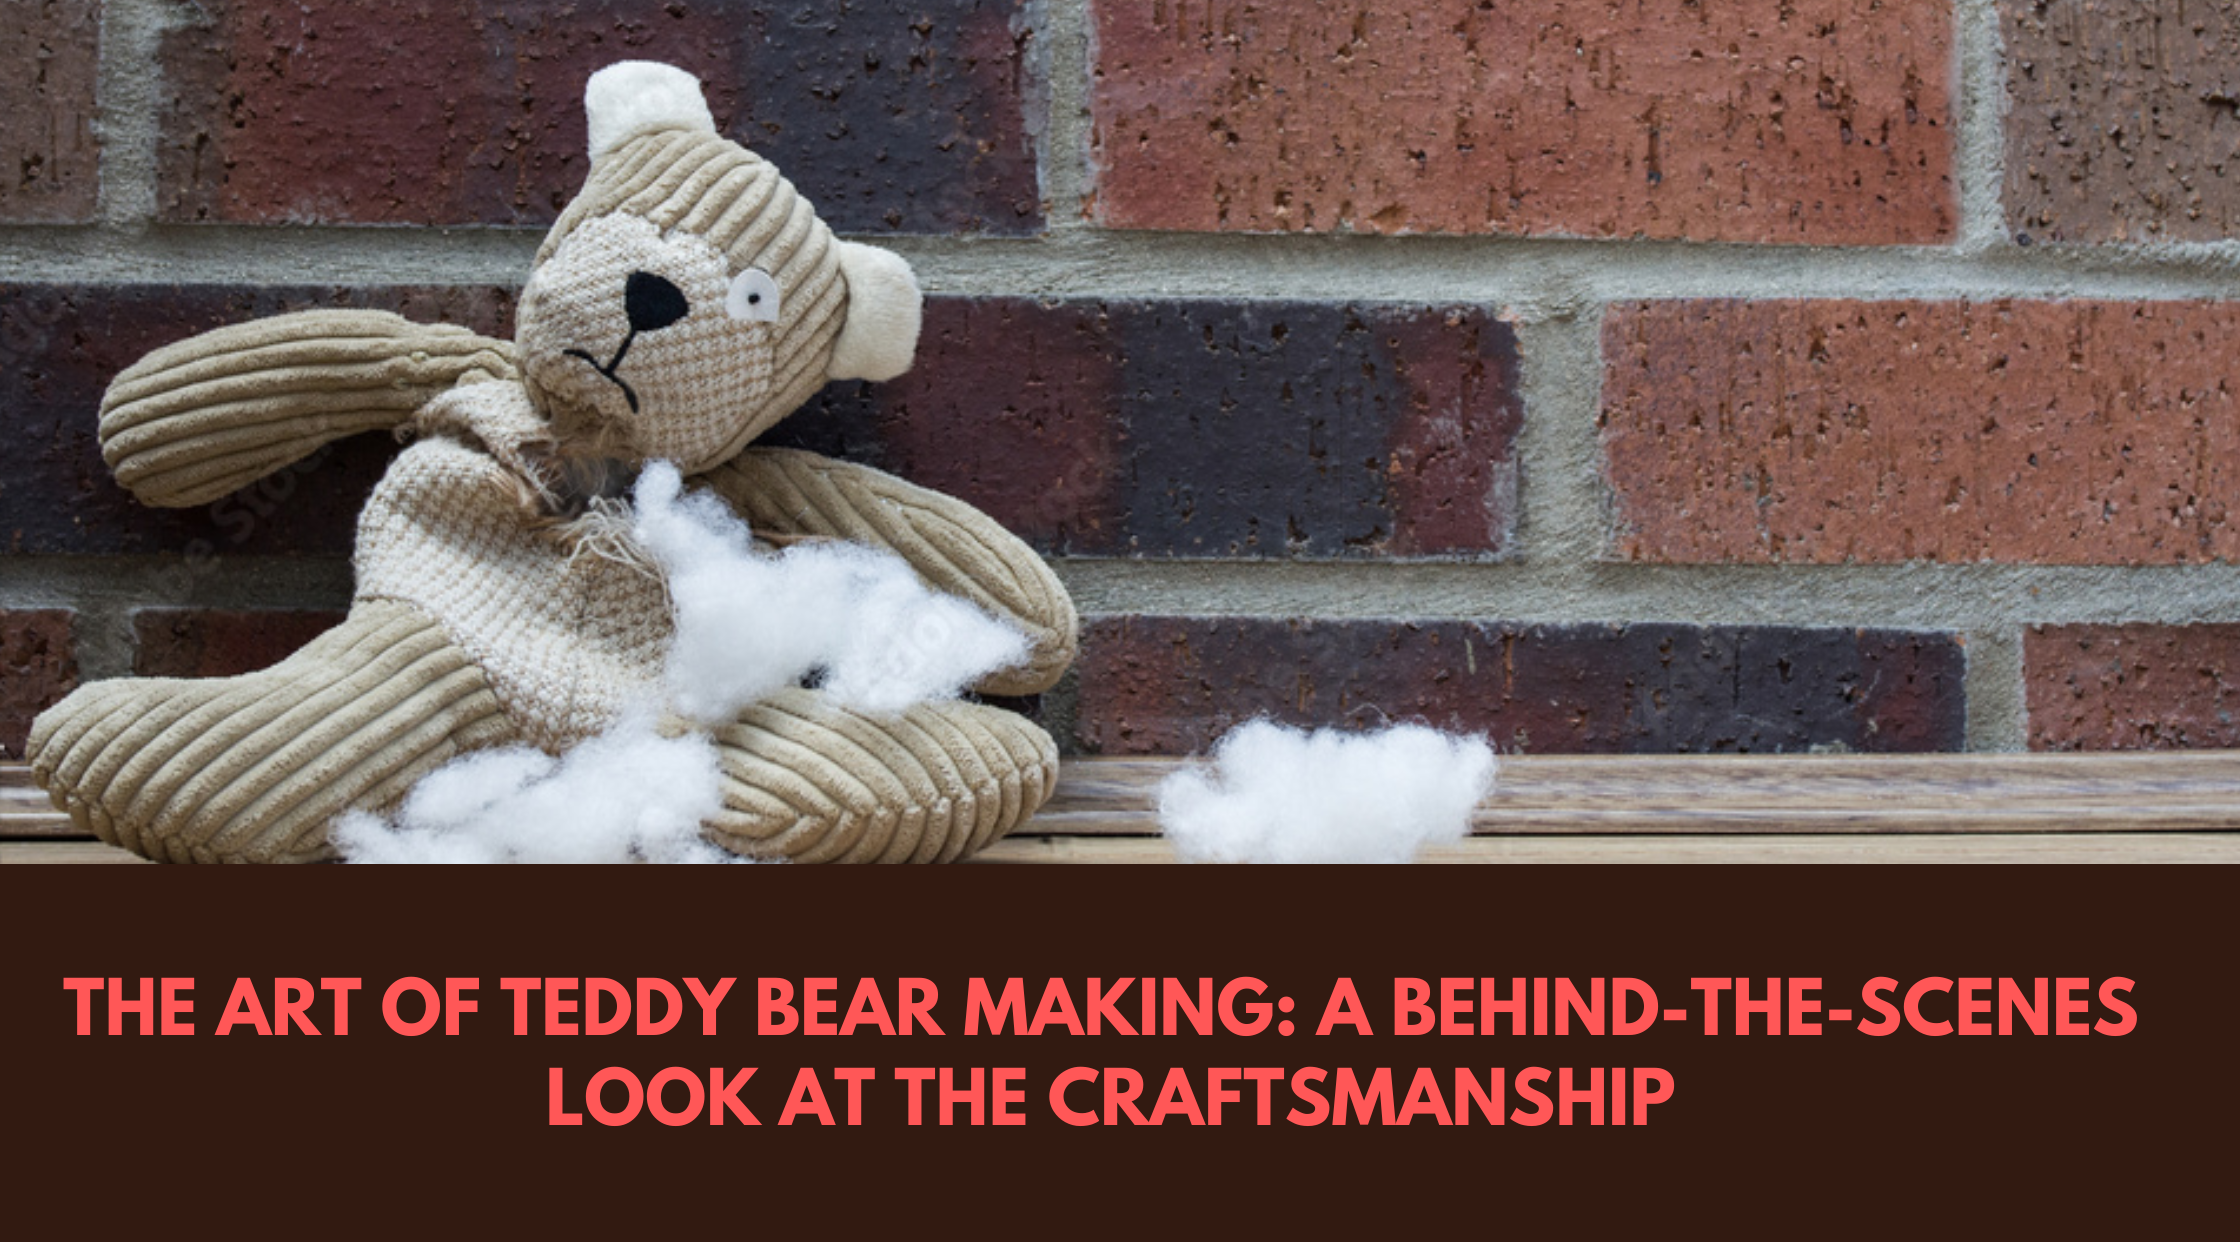 The Art of Teddy Bear Making: A Behind-the-Scenes Look at the Craftsmanship